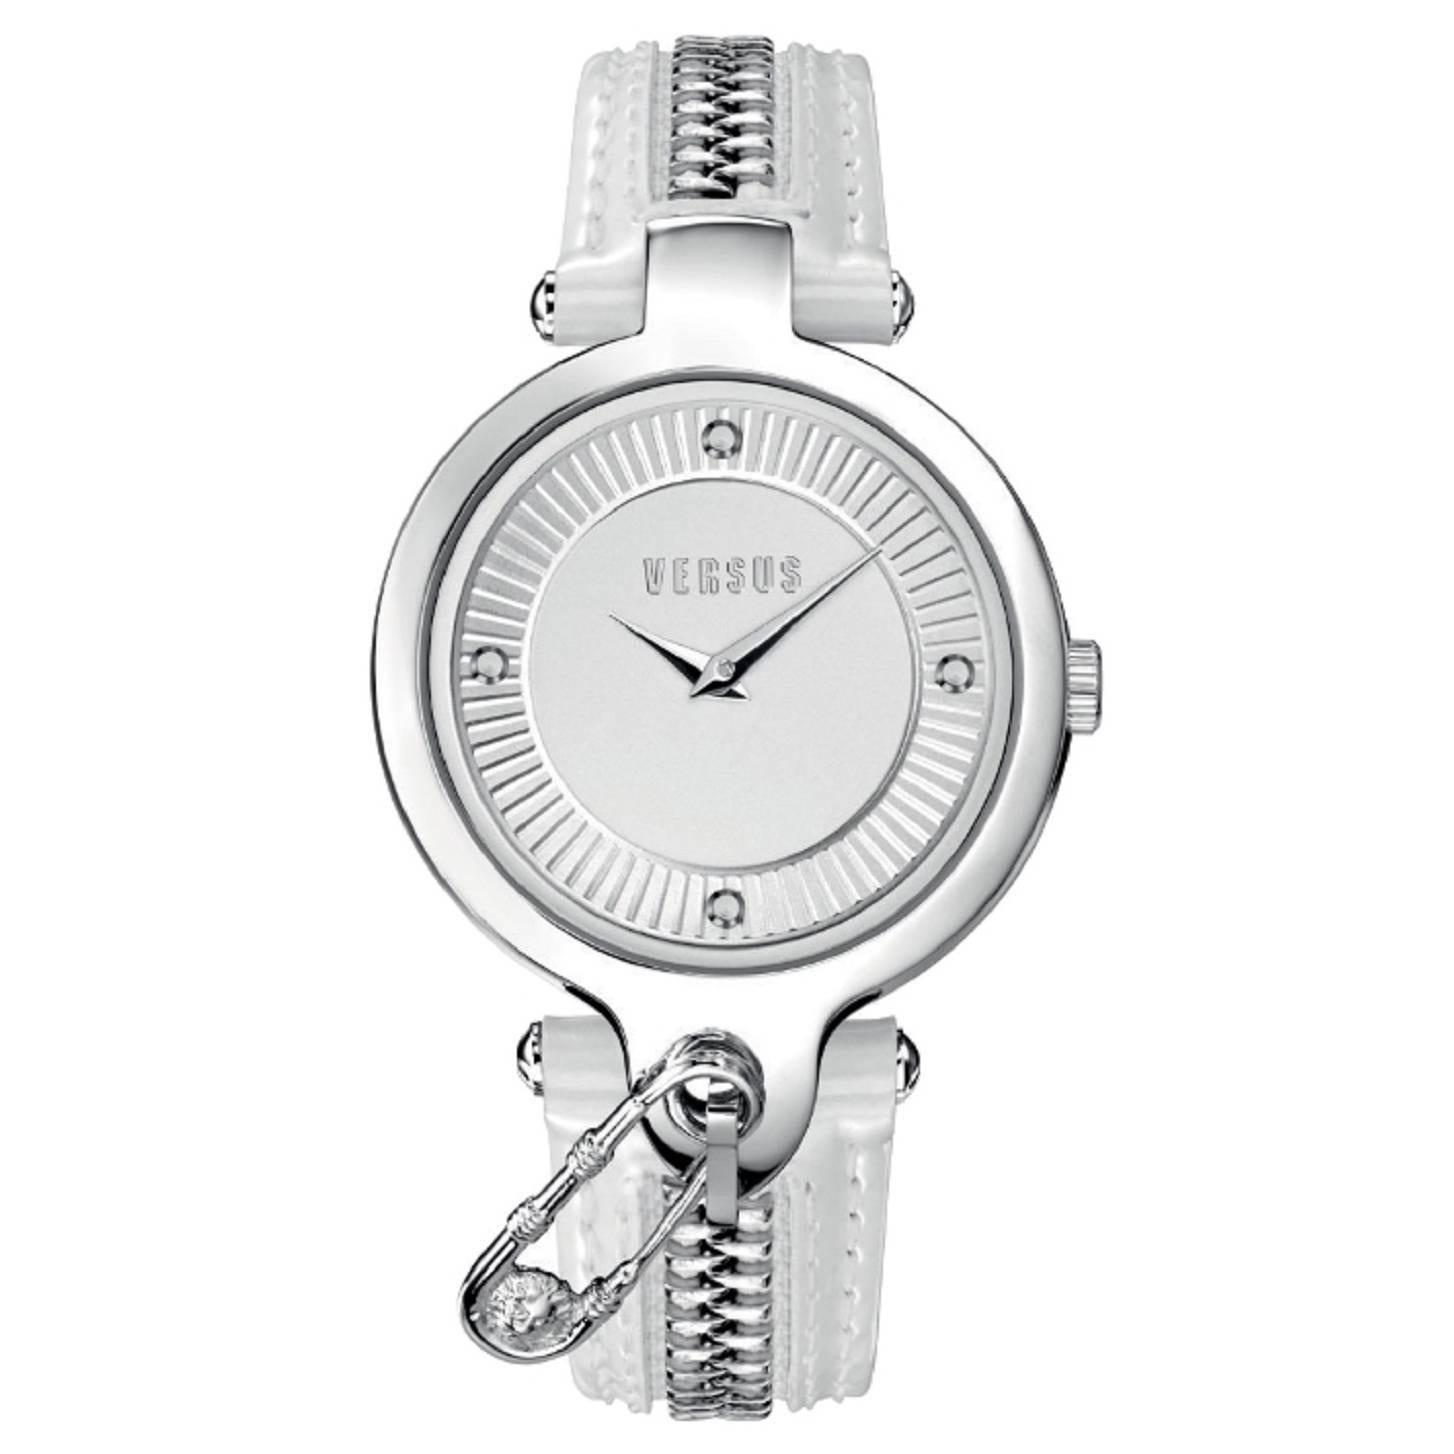 2015 Versus by Gianni Versace white watch For Sale